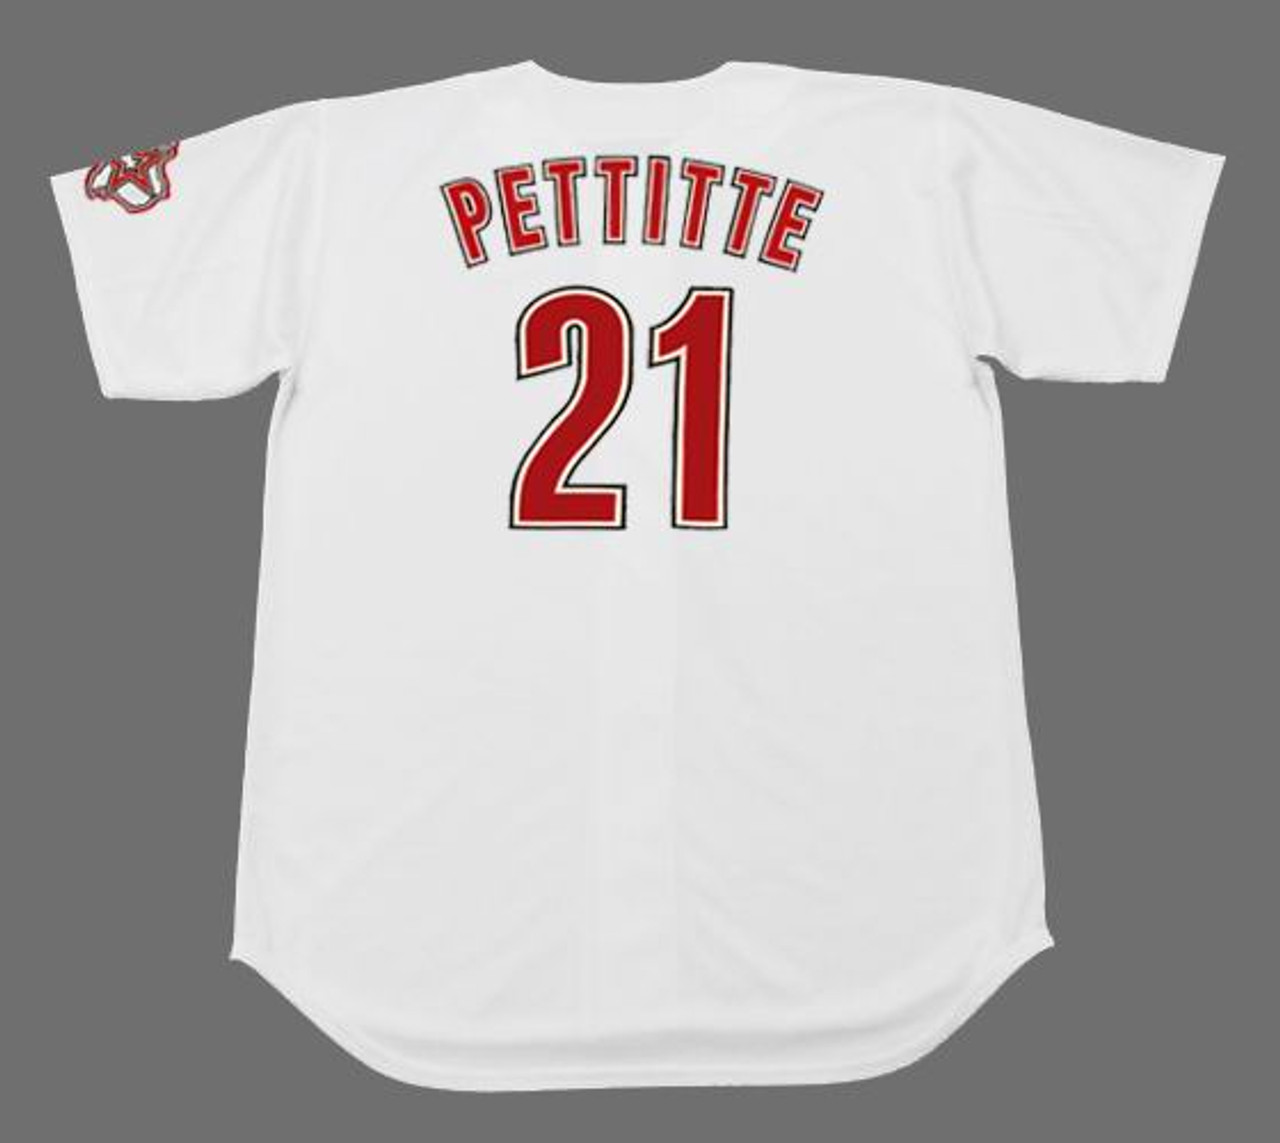 Andy Pettitte Jersey - 2005 Houston Astros Home Throwback MLB Baseball  Jersey